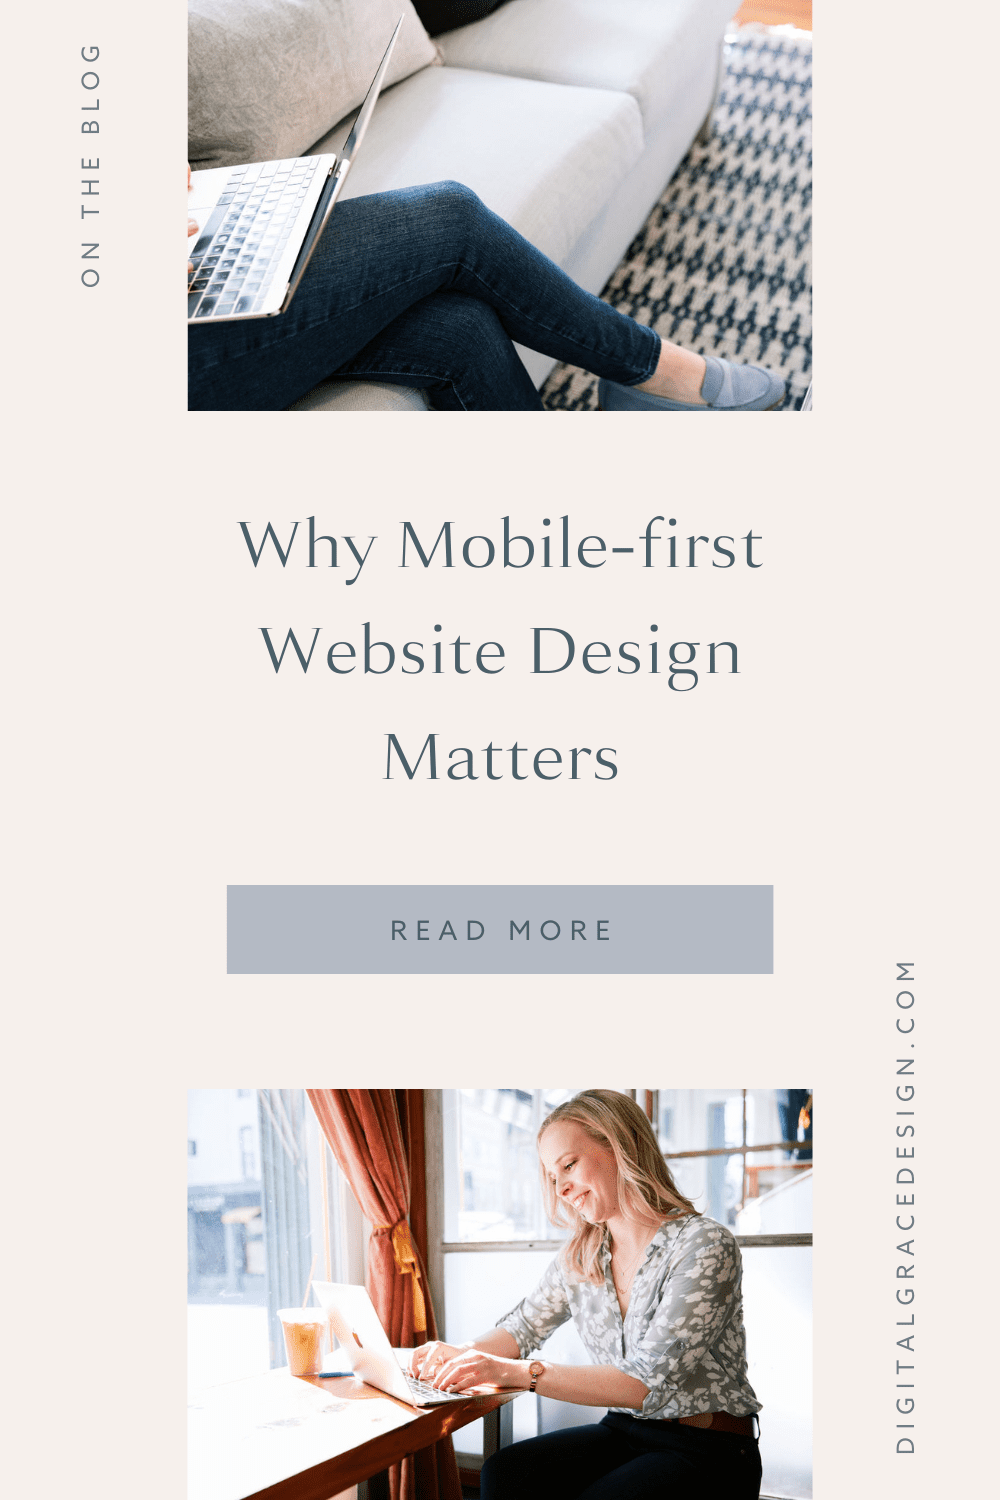 Why Mobile-first Website Design Matters